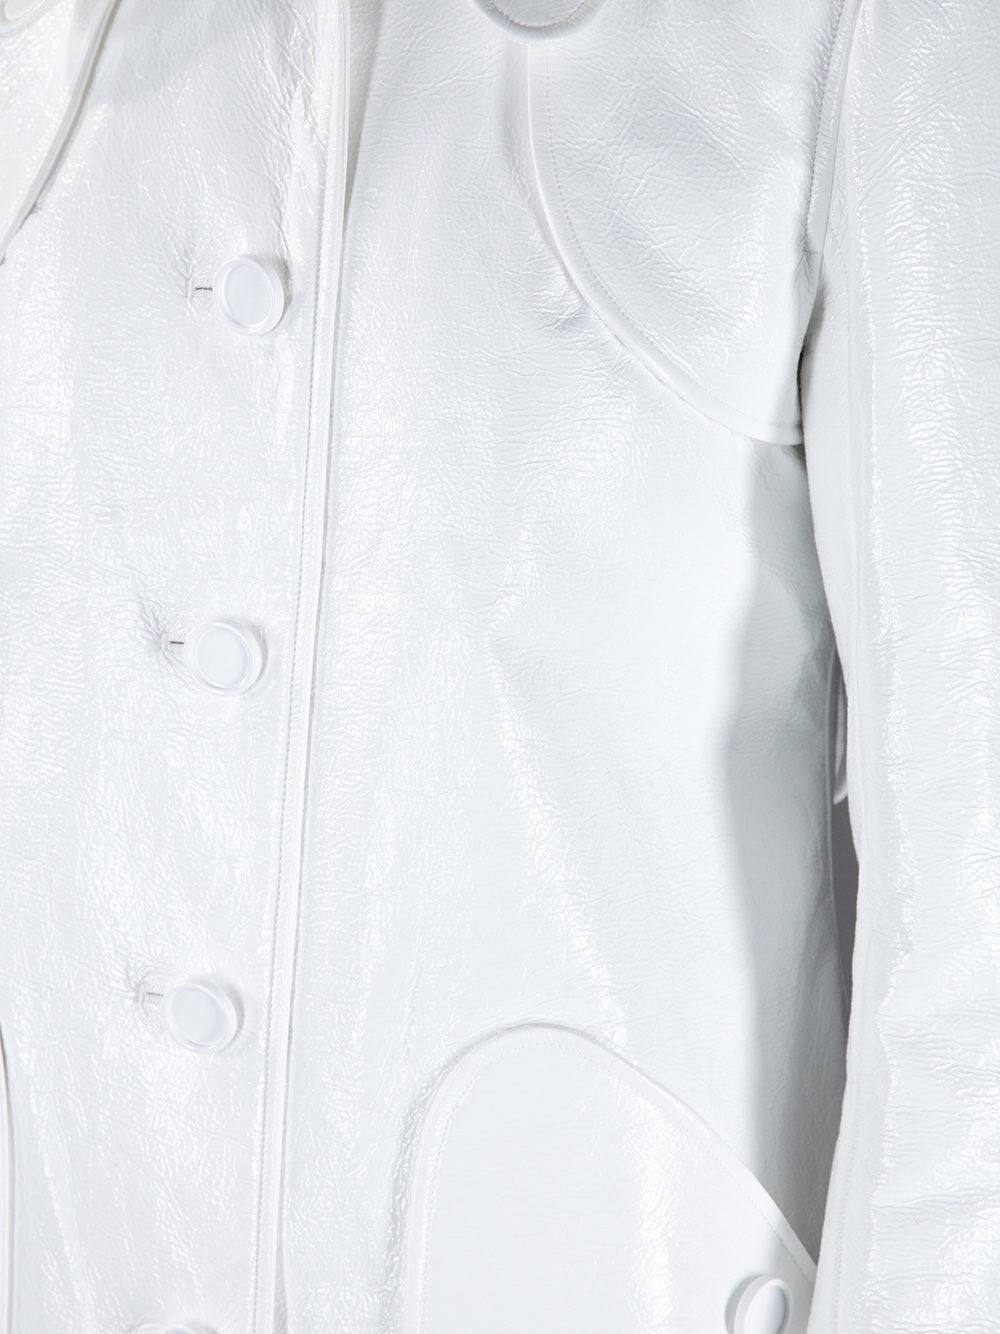 Courreges Vinyl Trench Coat in White Lyst